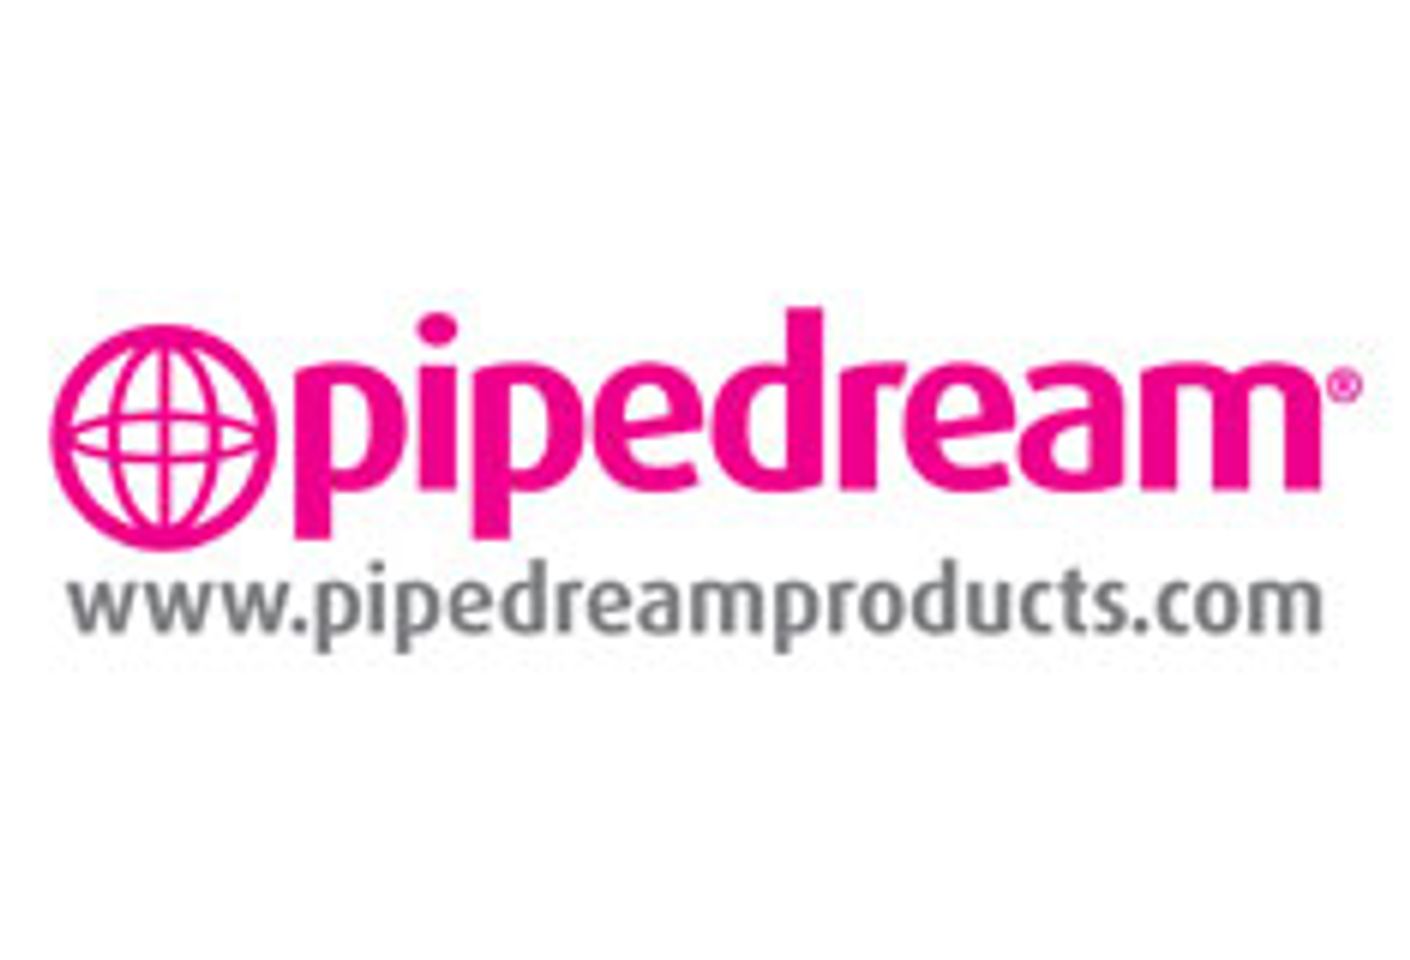 Pipedream Introduces Products at Scala Fair in The Netherlands